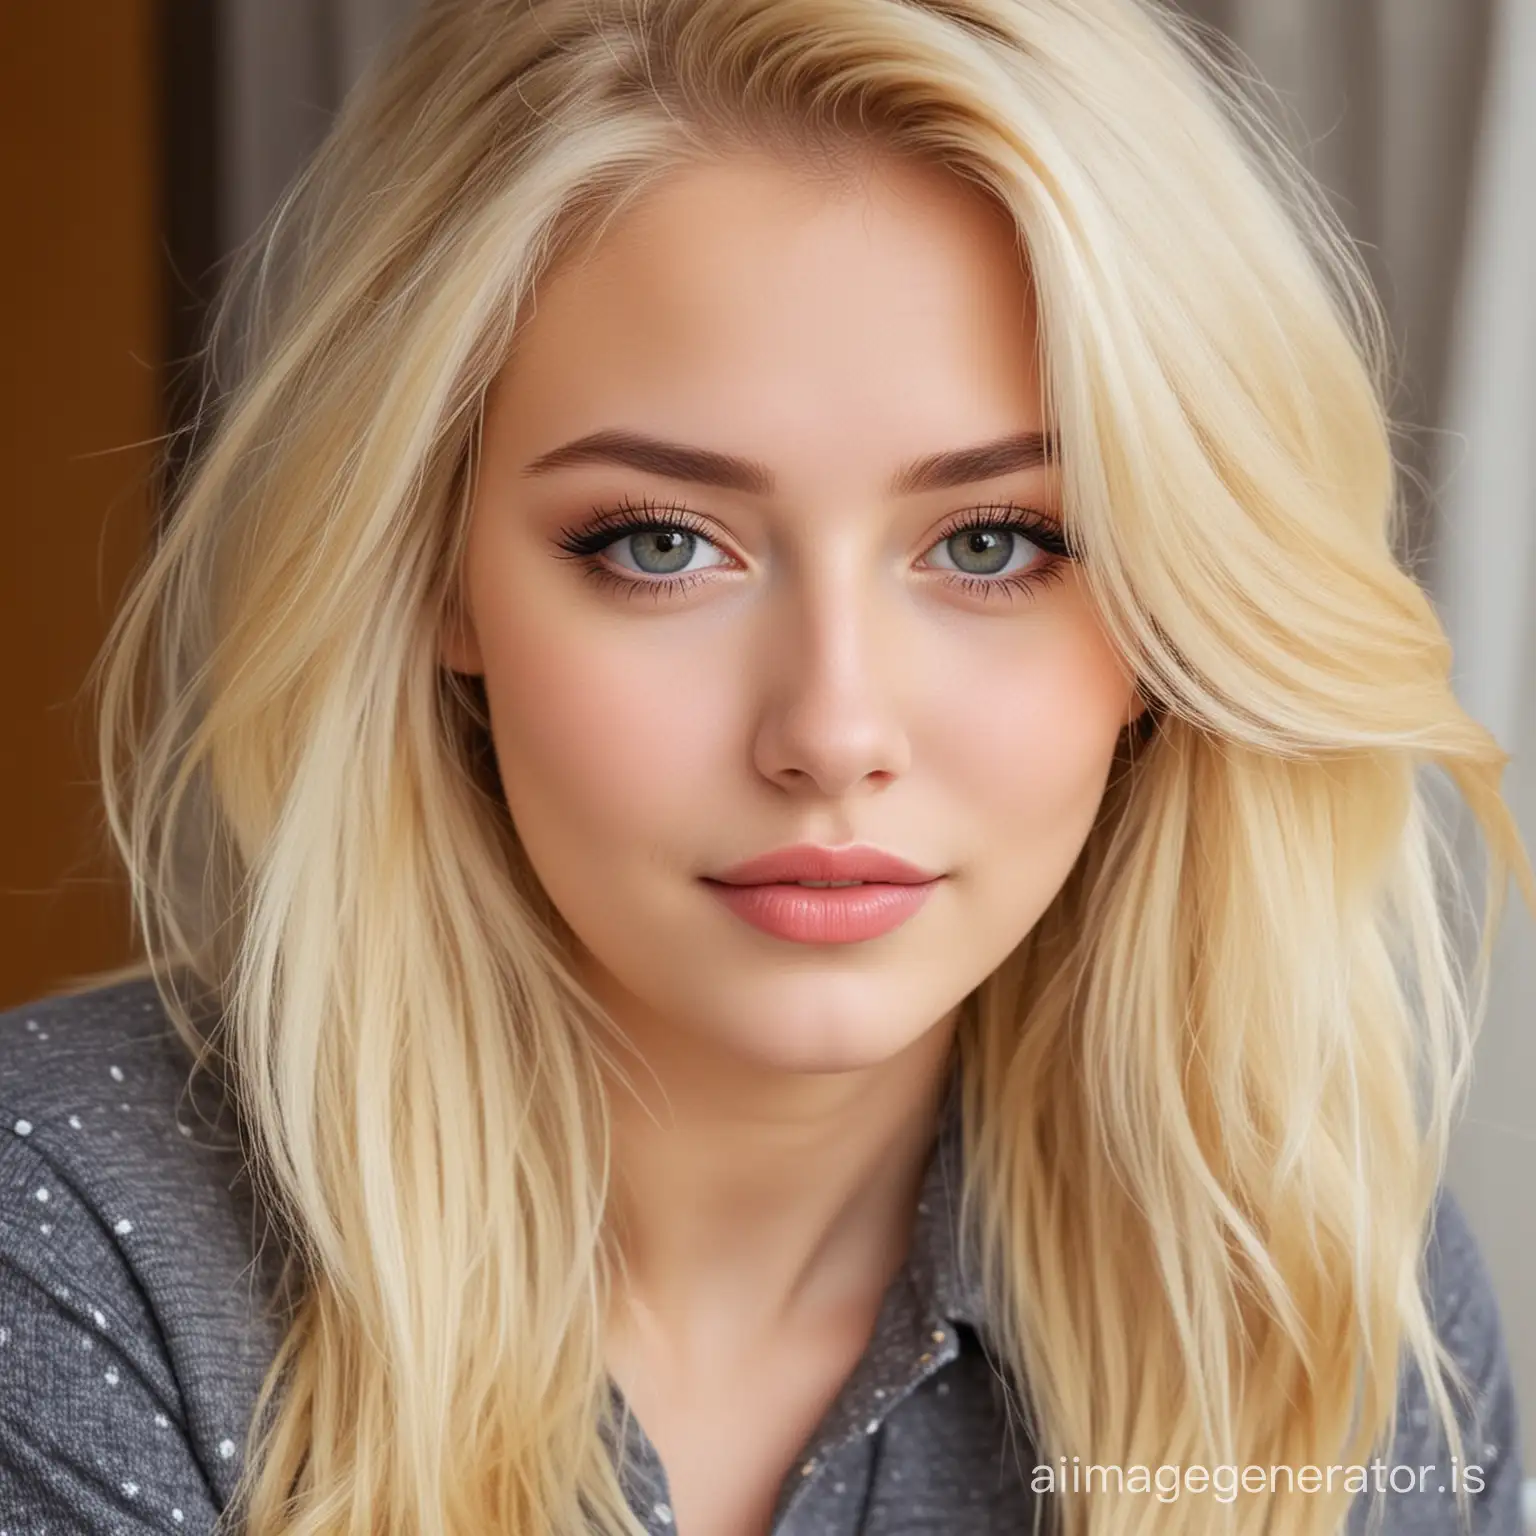 very beautiful girl who is blonde and cute and fun and lovely